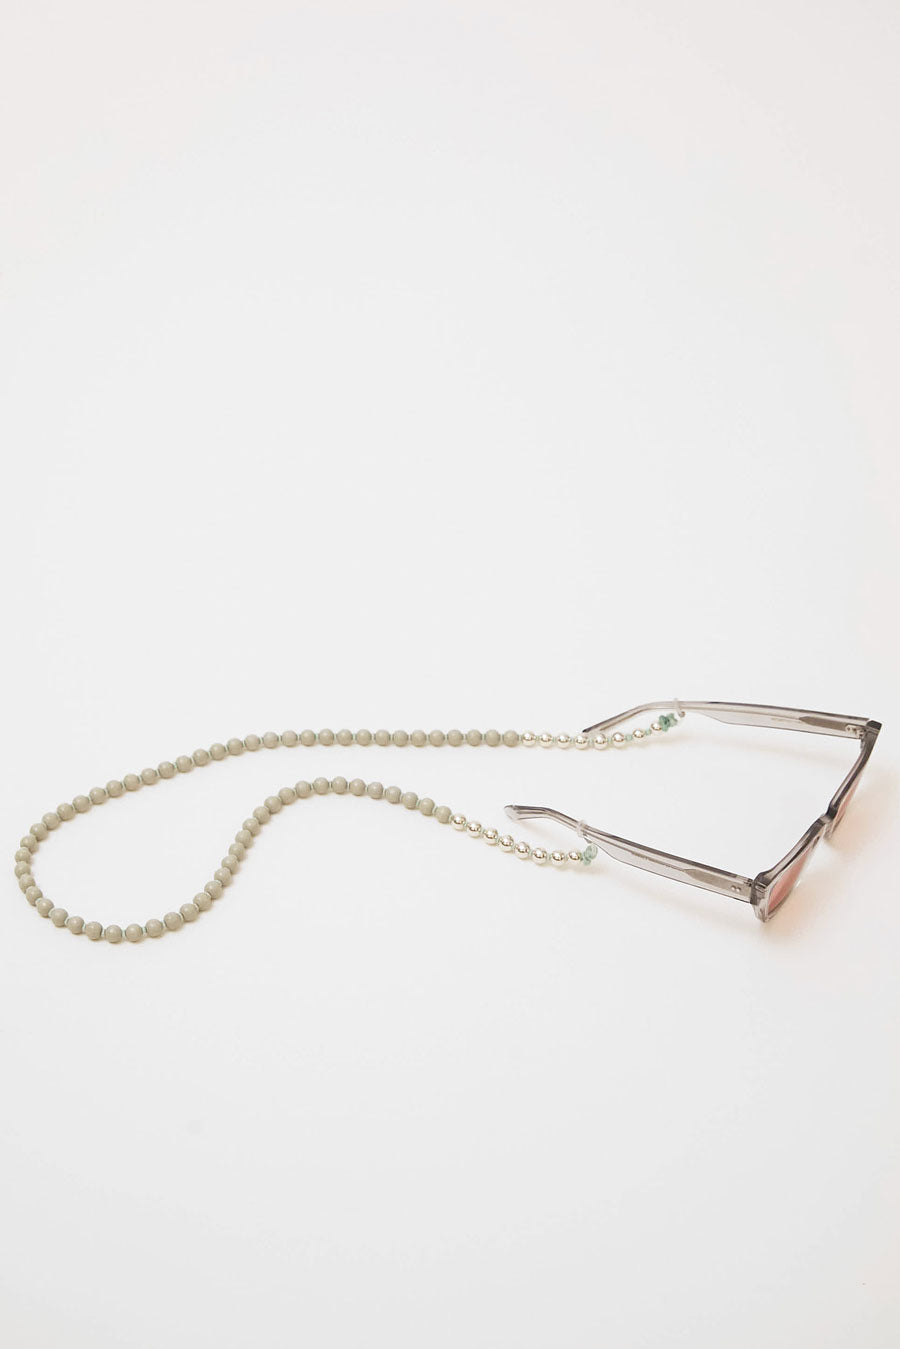 Ina Seifart Brillenkette Silver Glasses Chain in Light Grey with Sage Thread